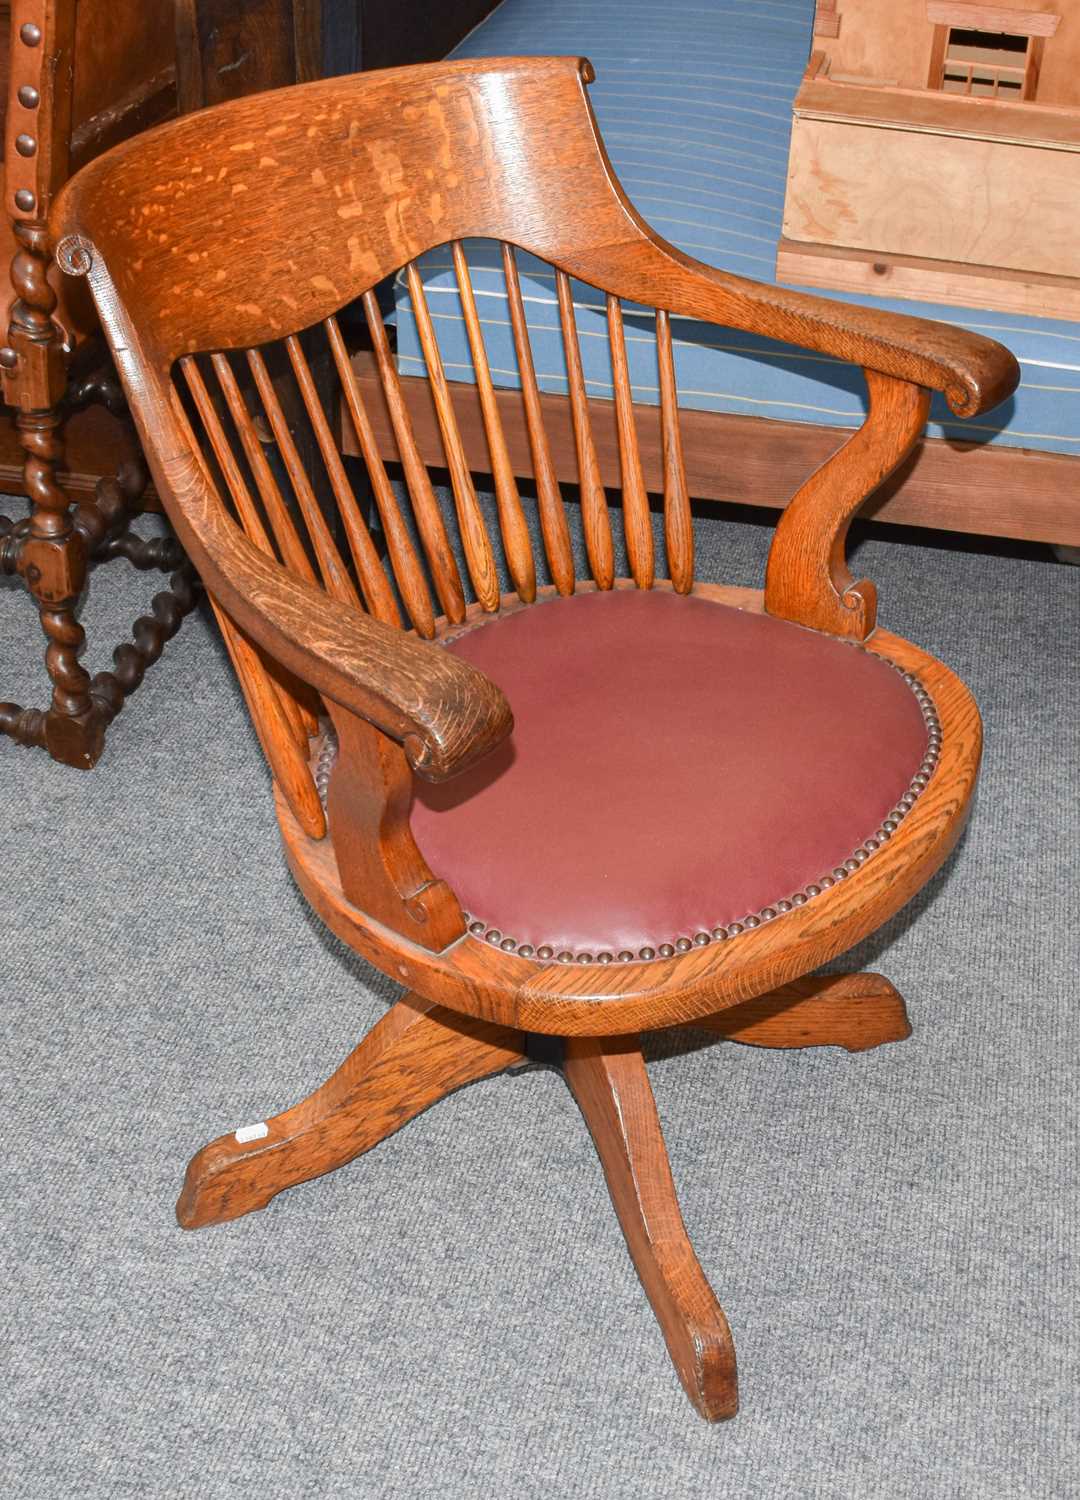 An Oak Swivel Desk Chair, early 20th centuryThe chair has a mechanism but it is not in operation.